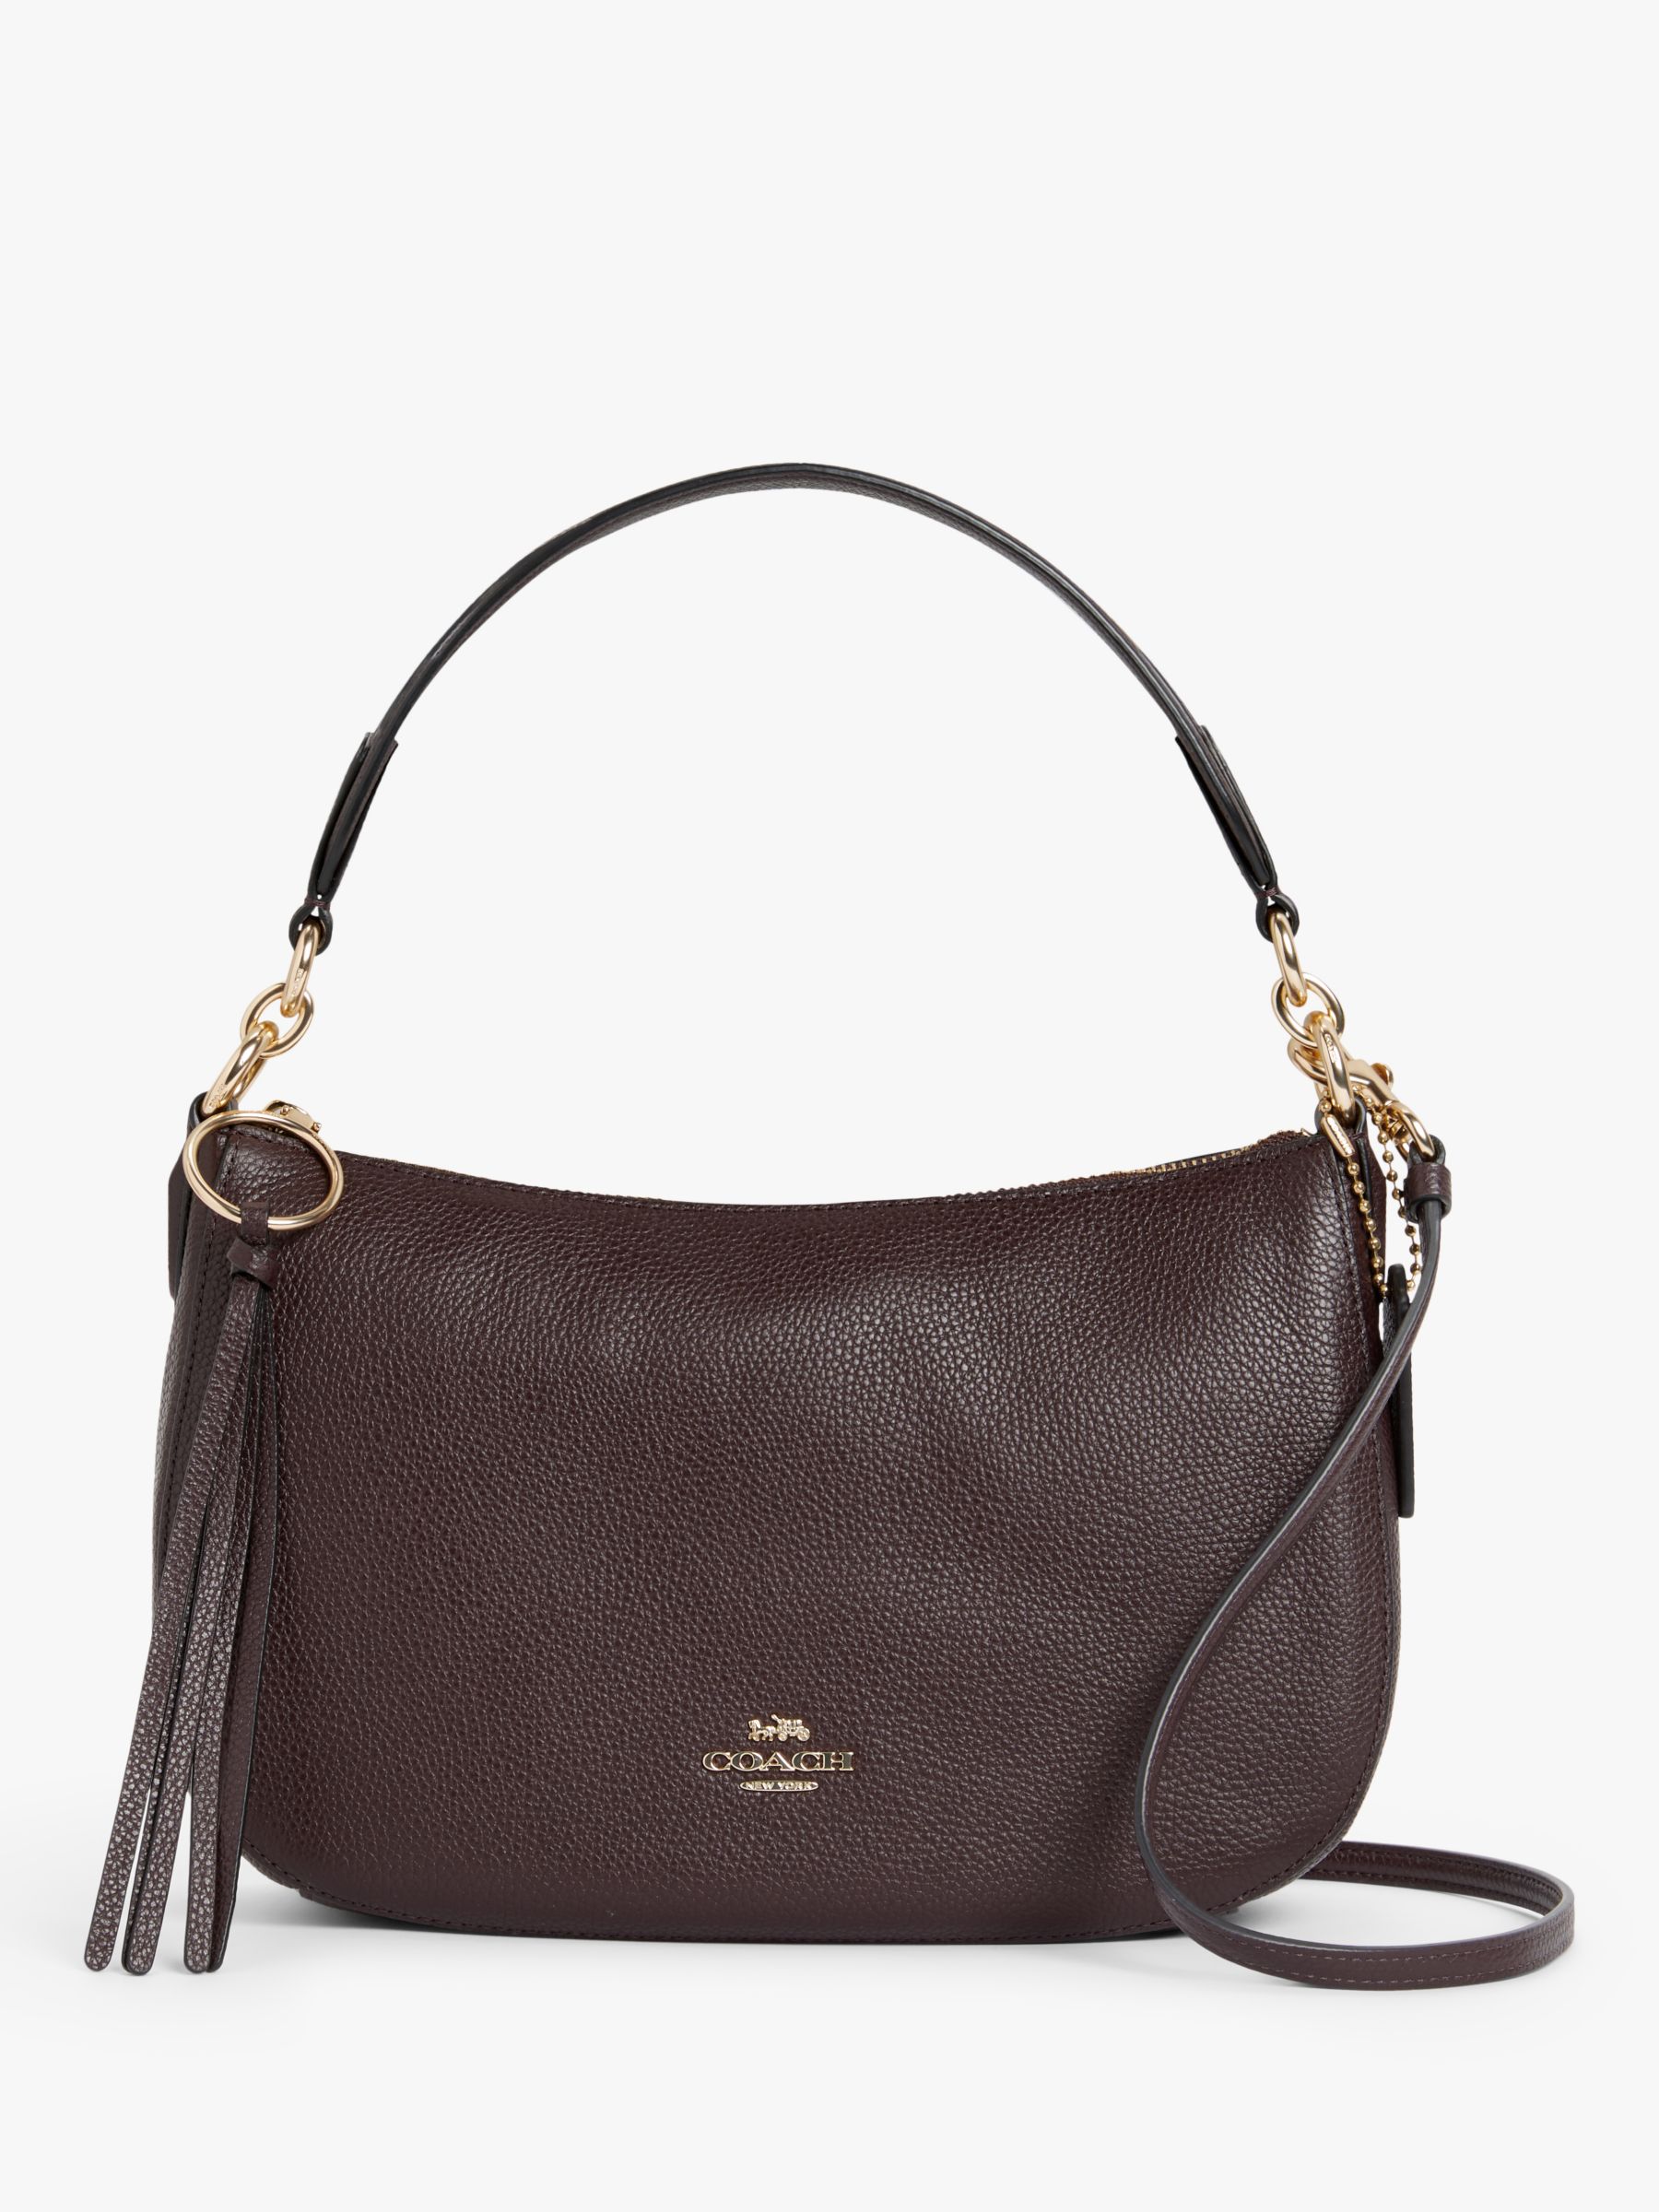 Coach Sutton Leather Cross Body Bag, Oxblood at John Lewis & Partners